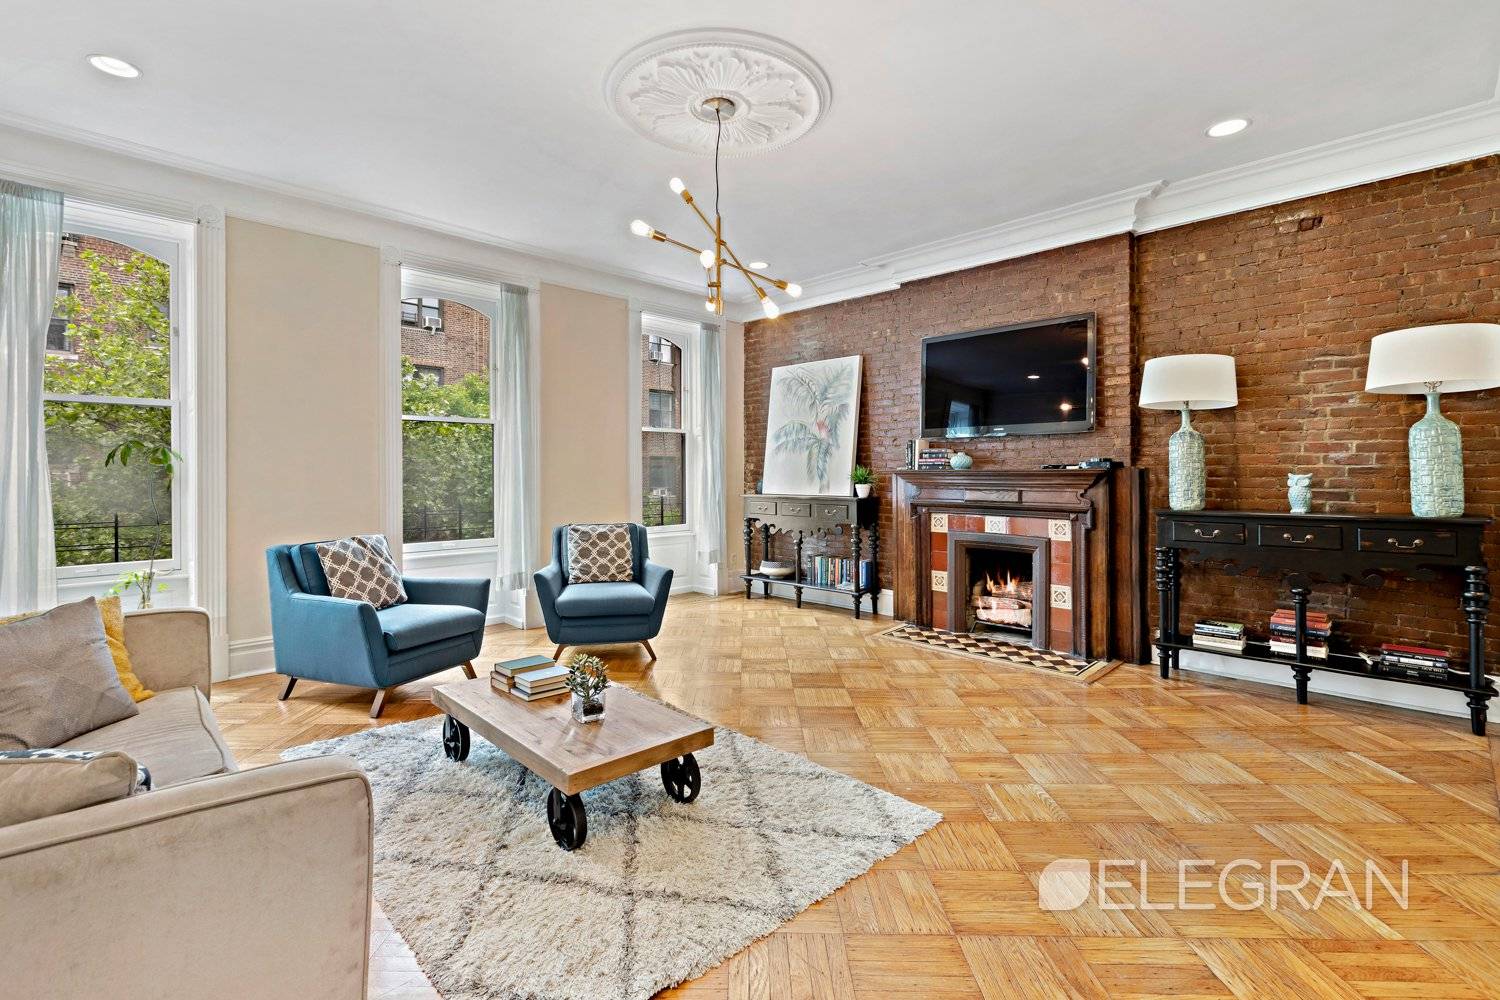 Also available Furnished Perched above a vibrant tree lined street, and steps away from Central Park you'll find apartment 3 ; a beautiful 4 bedroom, 2.